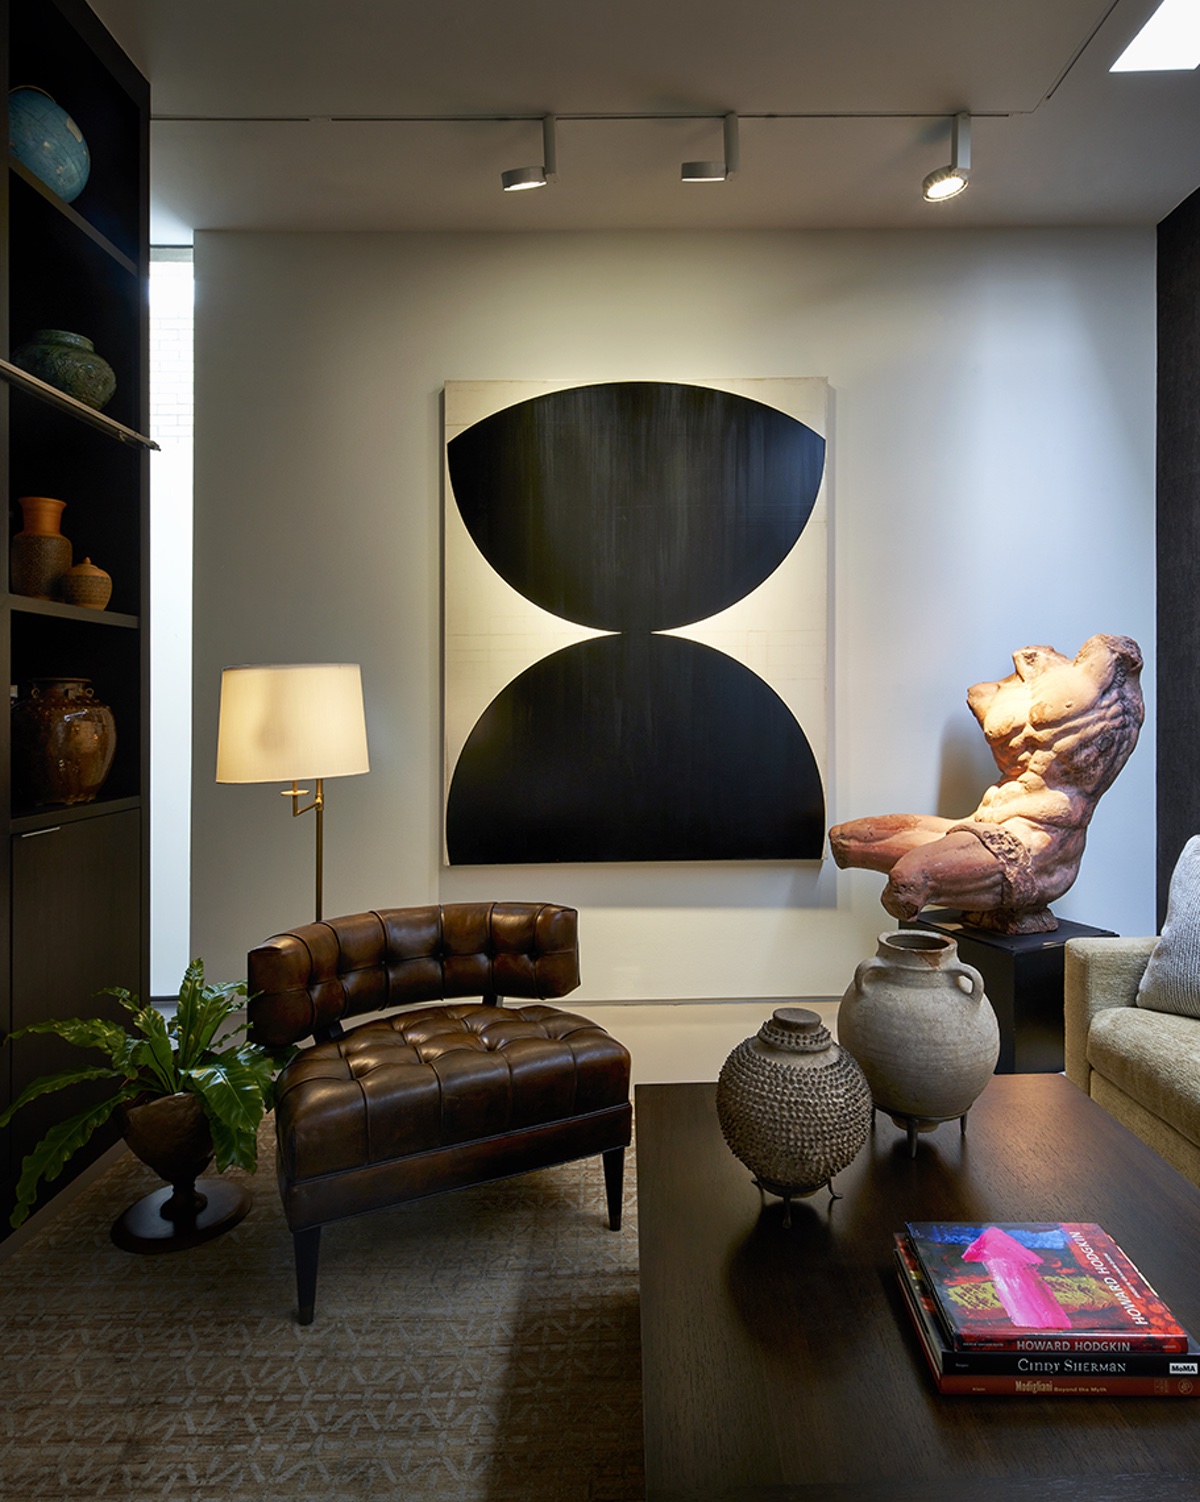 lounge area with tufted brown leather chair in front of abstract black and white painting